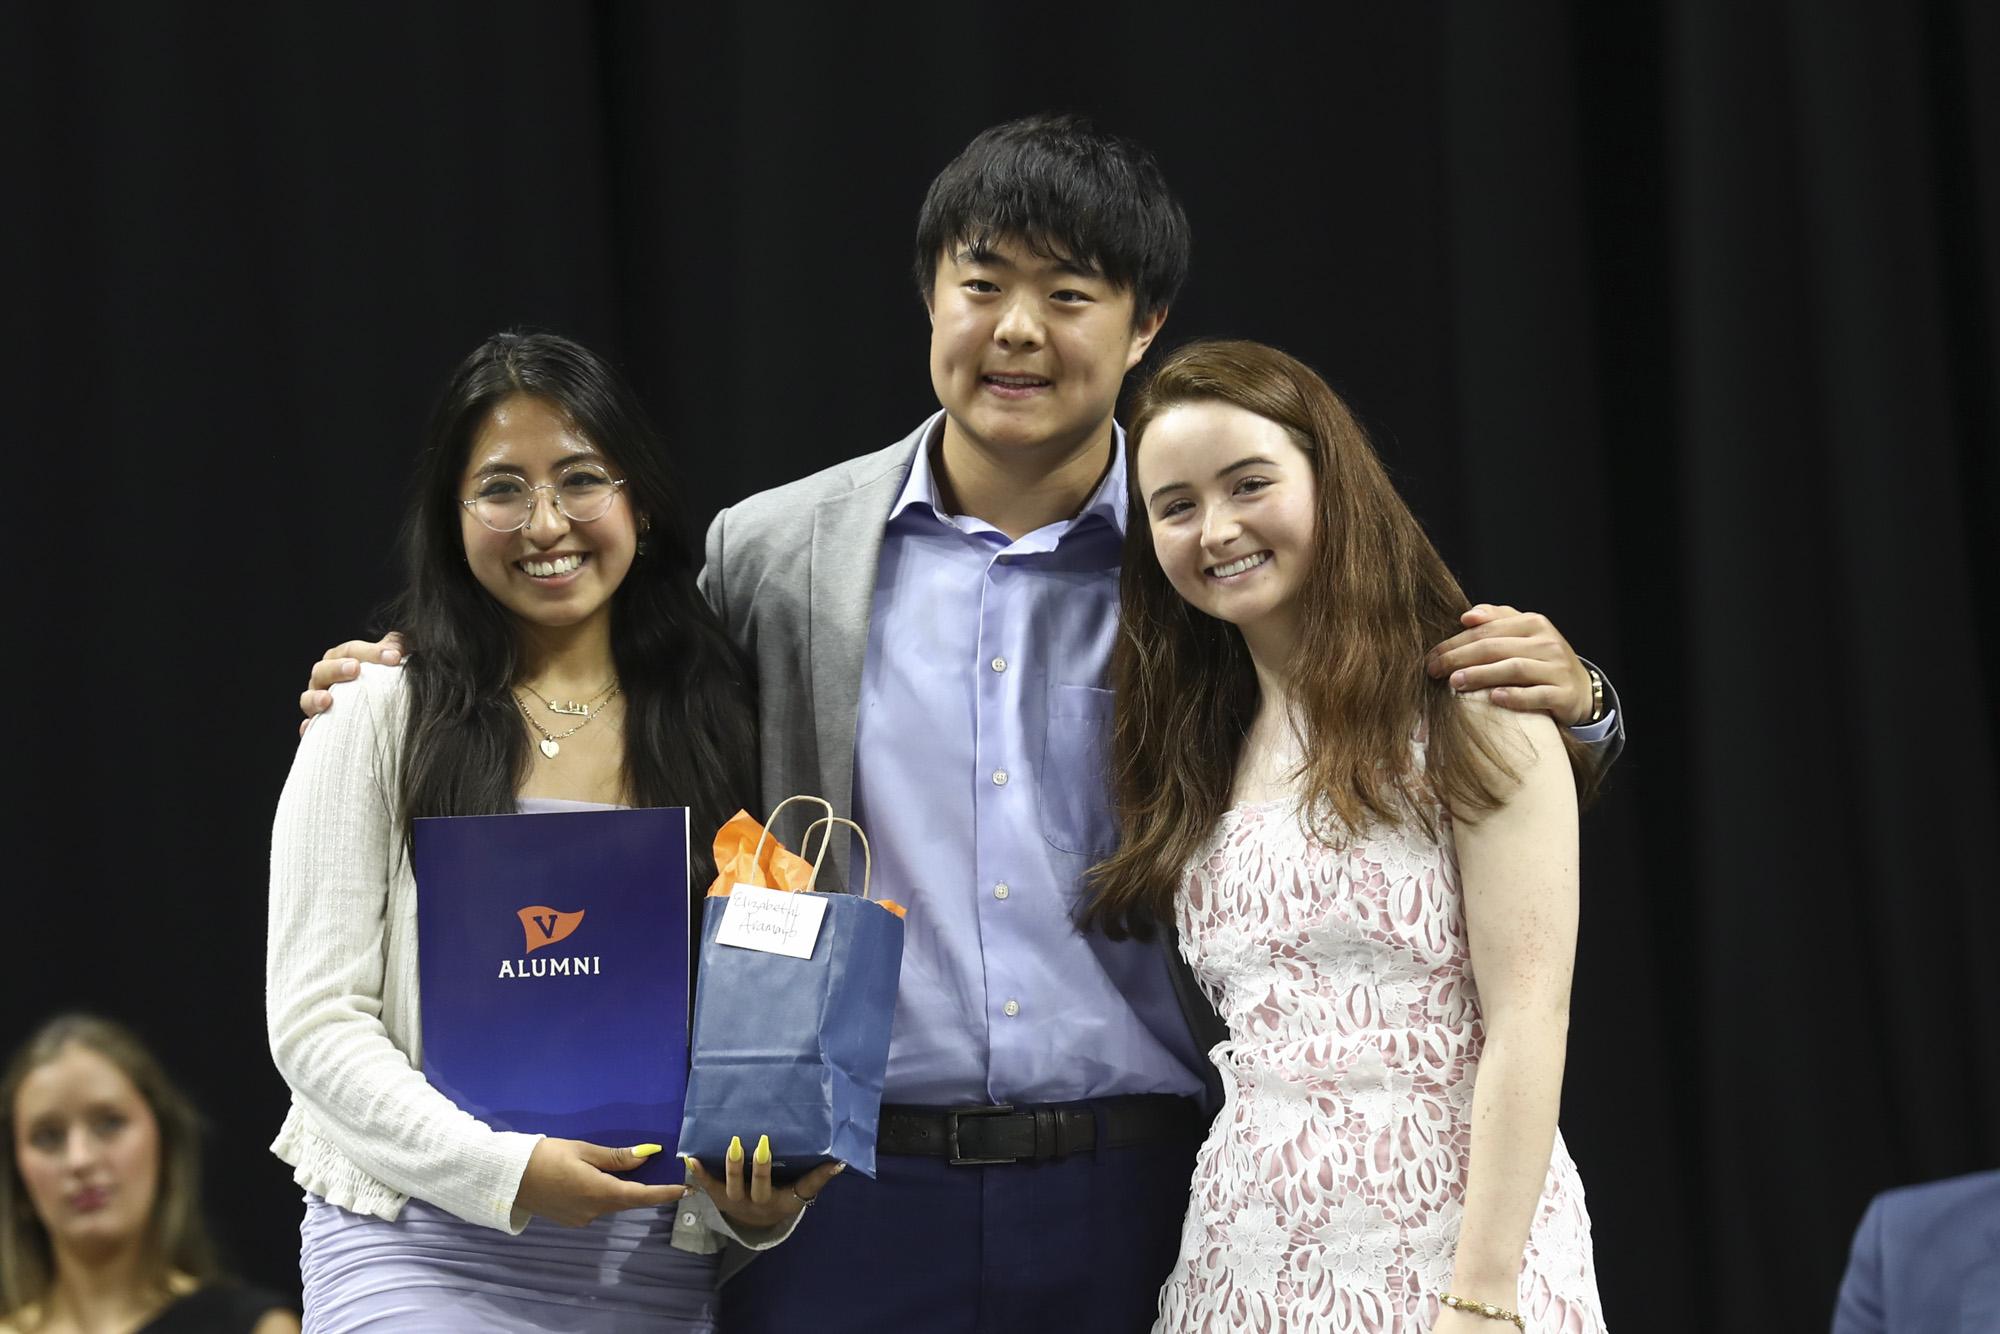 A smiling woman holding a gift bag poses for a photo with a man and a woman